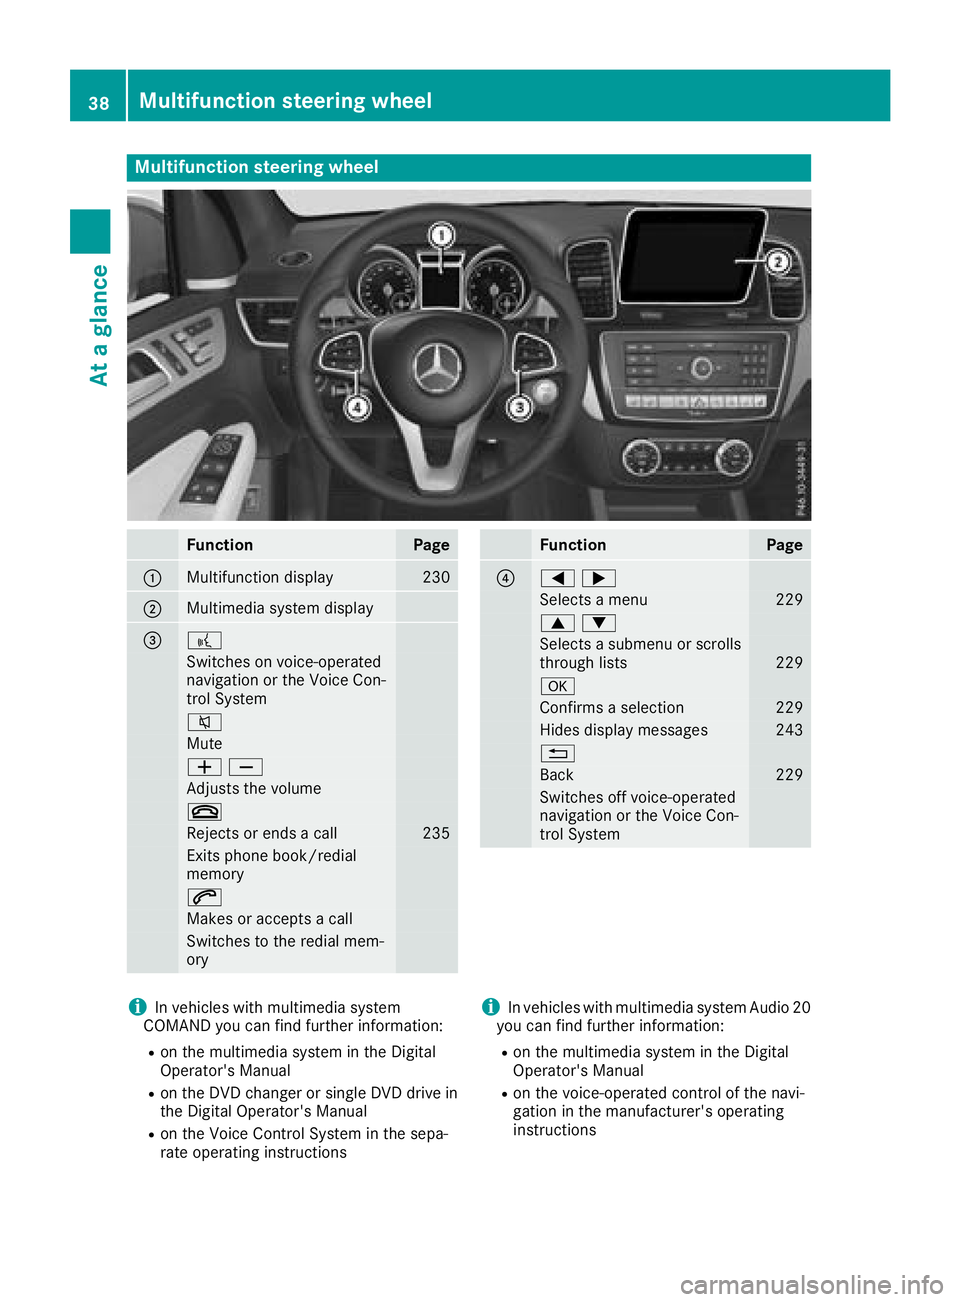 MERCEDES-BENZ GLE COUPE 2018 Owners Guide Multifunction steering wheel
FunctionPage
:Multifunction display230
;Multimedia system display
=?
Switches on voice-operated
navigation or the Voice Con-
trol System
8
Mute
WX
Adjusts the volume
~
Rej